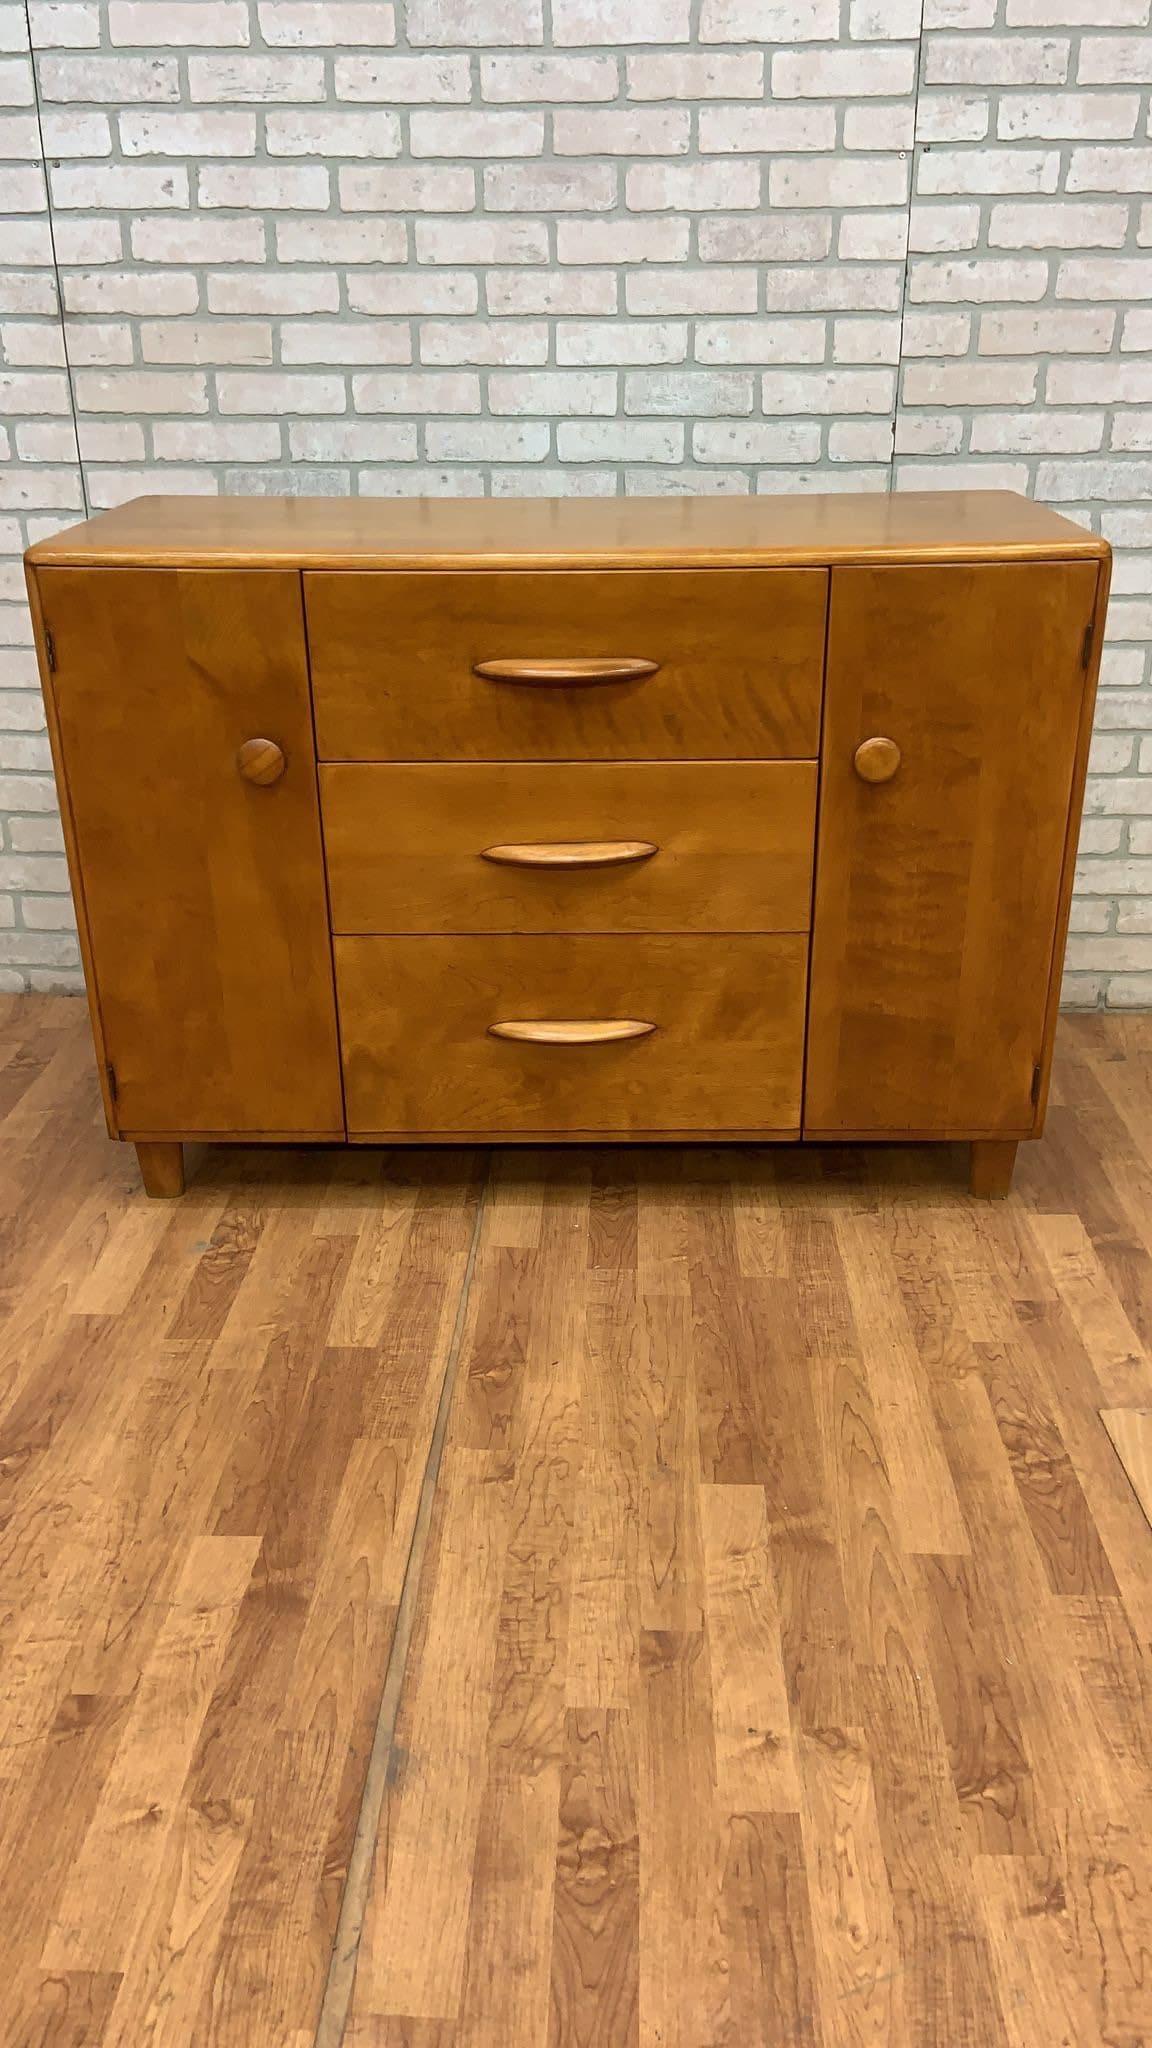 Mid-Century Modern Heywood Wakefield Credenza/Sideboard

Deco and Modern combined Heywood Wakefield Credenza/Sideboard - Solid wood construction. American made. Soft curves. There is 3 deep drawers in the center and cabinet space at left and